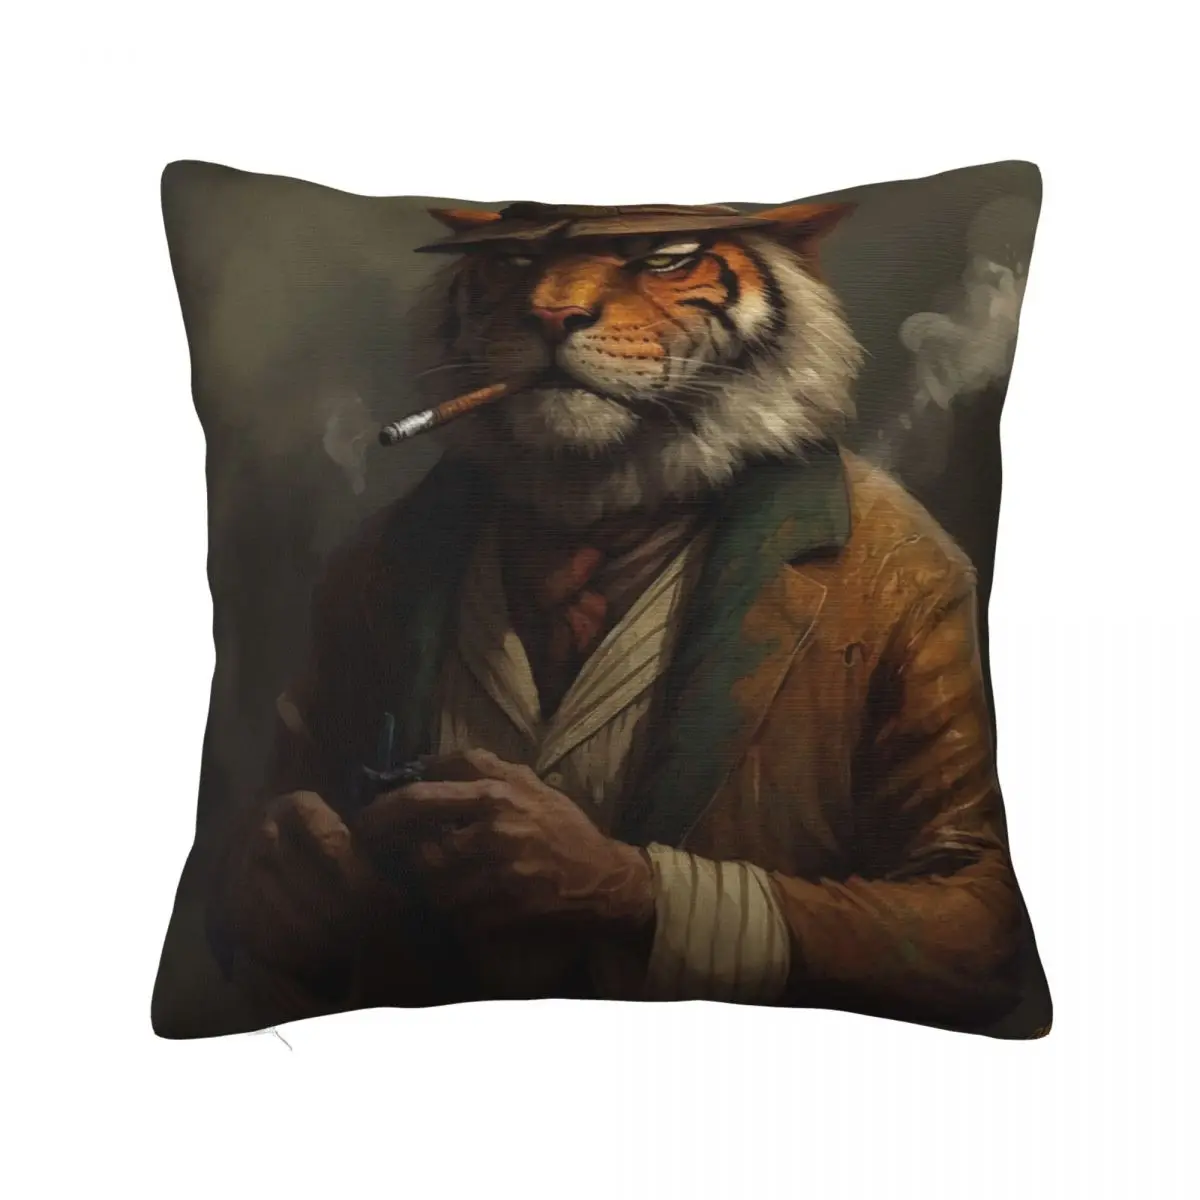 

Tiger Pillow Case Gangster-style Godfather Polyester Bed Pillowcase Zipper Summer Funny Cover